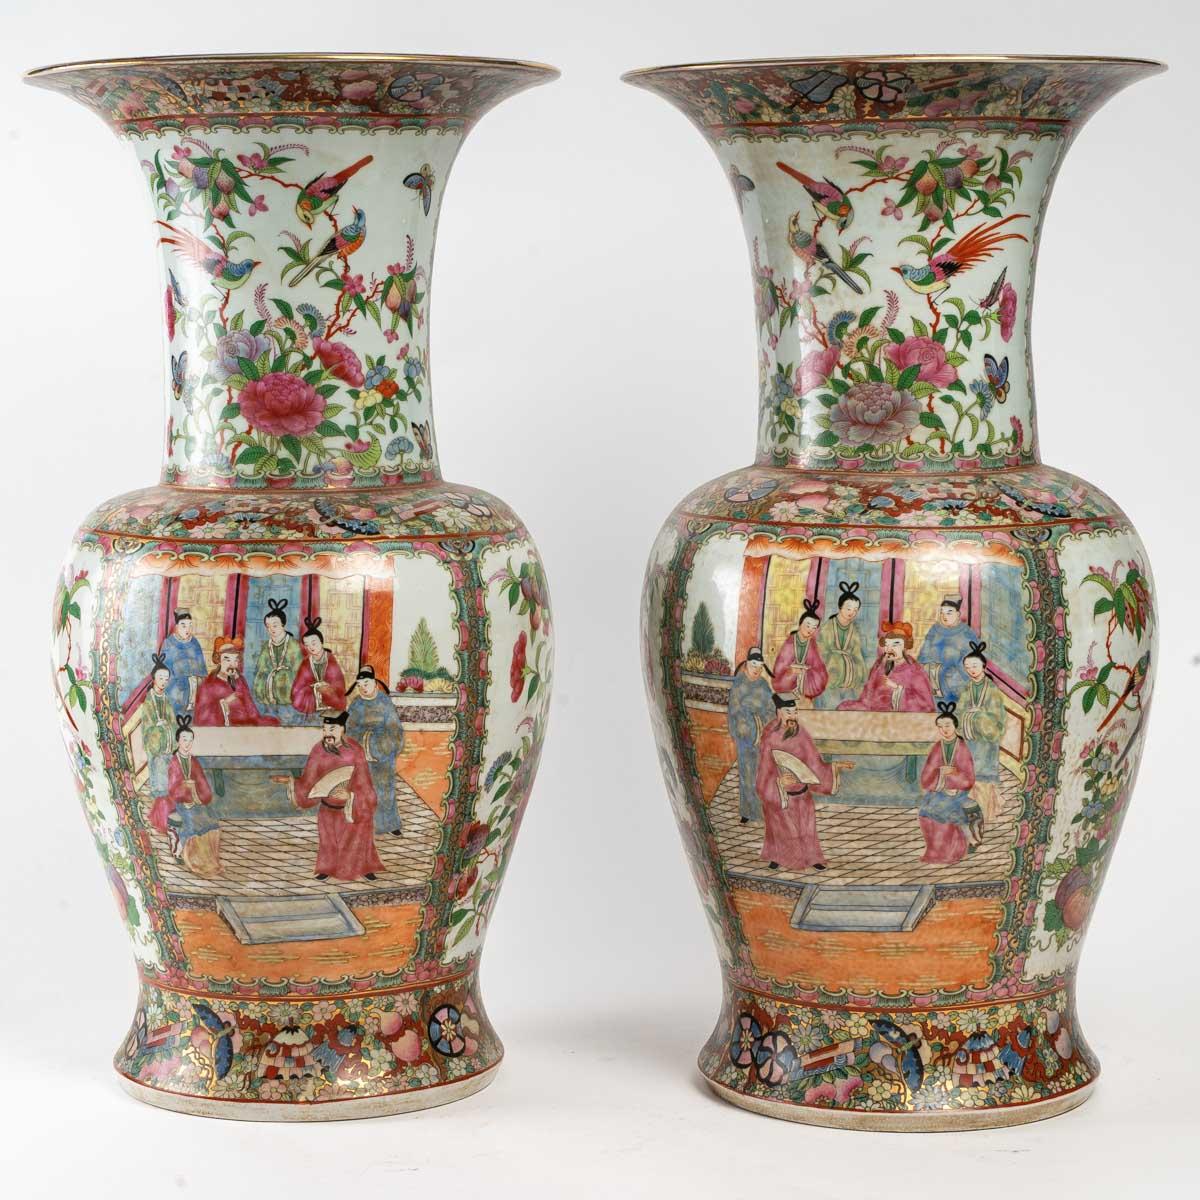 20th Century Important Pair of Canton Vases, China